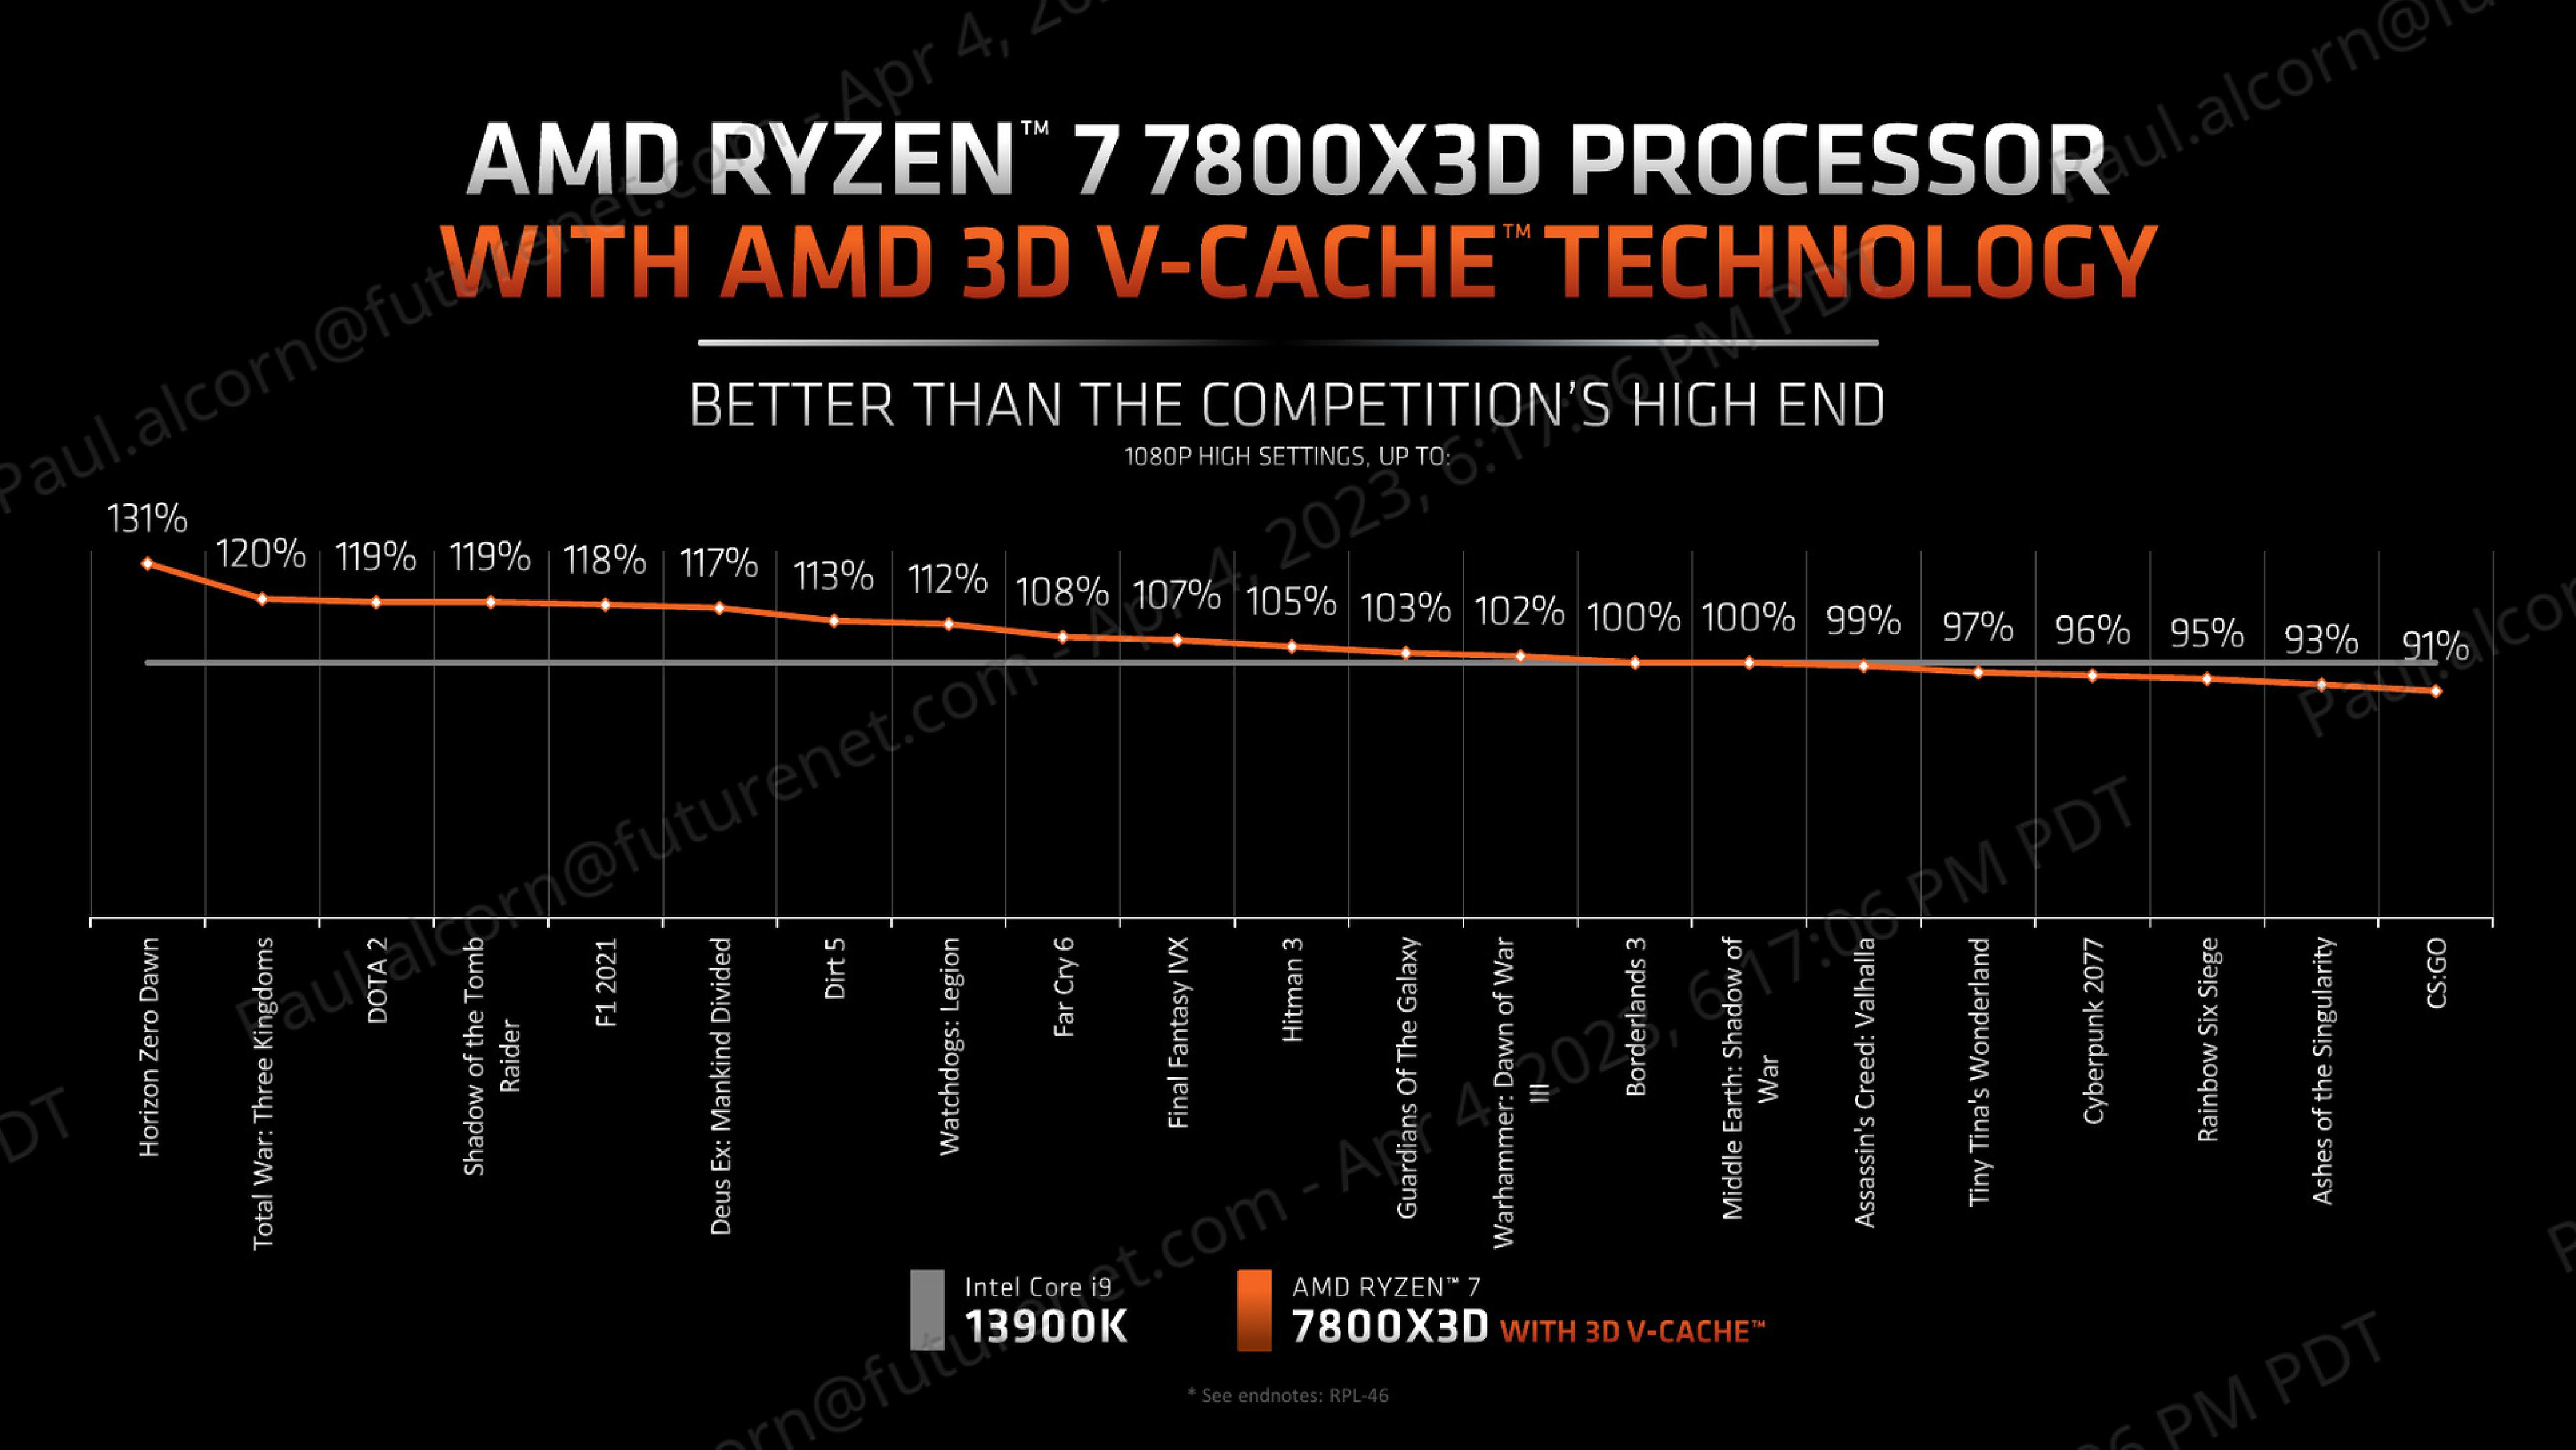 AMD Ryzen 7 5800X3D Review: 3D V-Cache Powers a New Gaming Champion